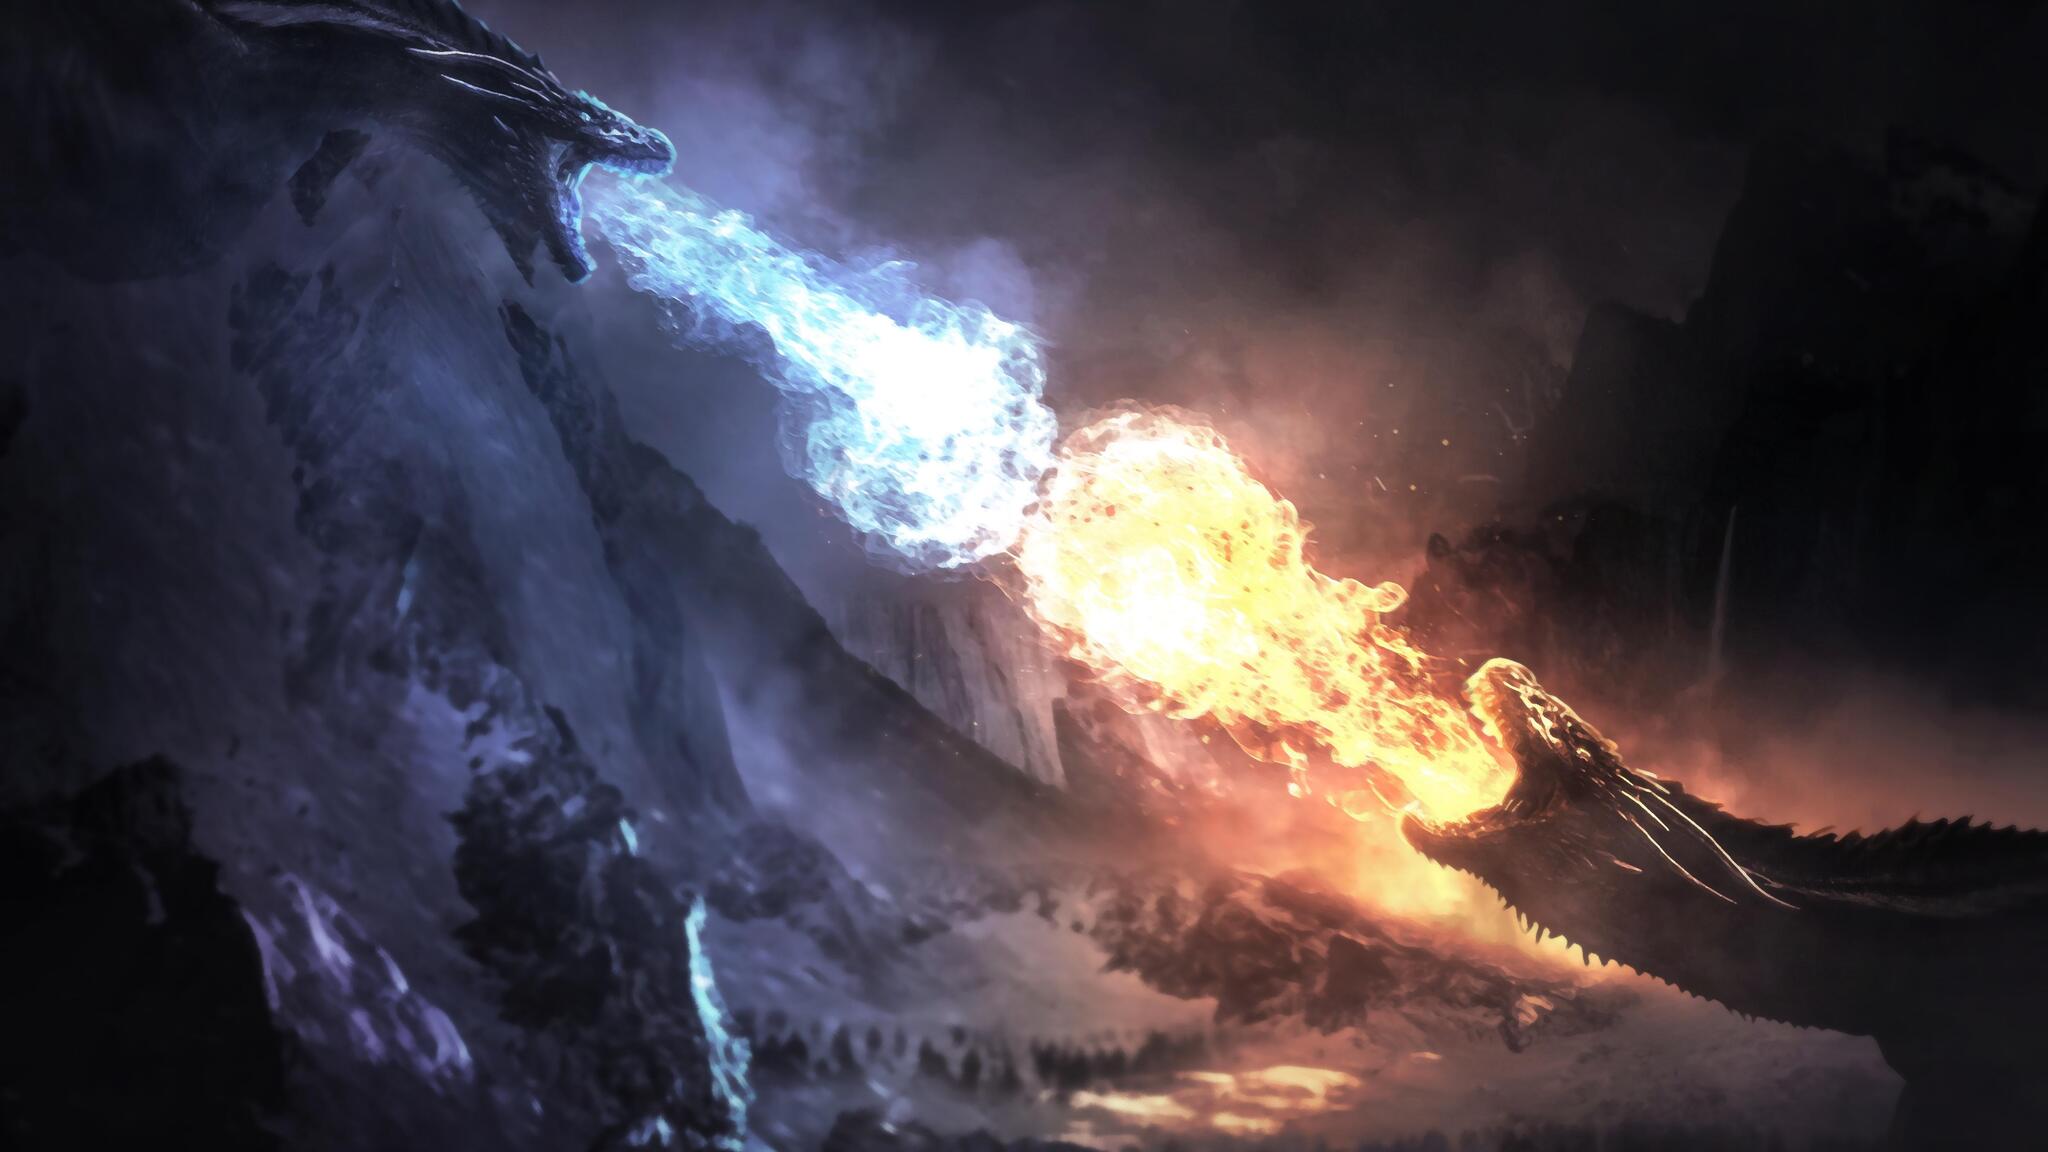 Dragon Battle Fire Vs Ice Game Of Thrones Wallpapers